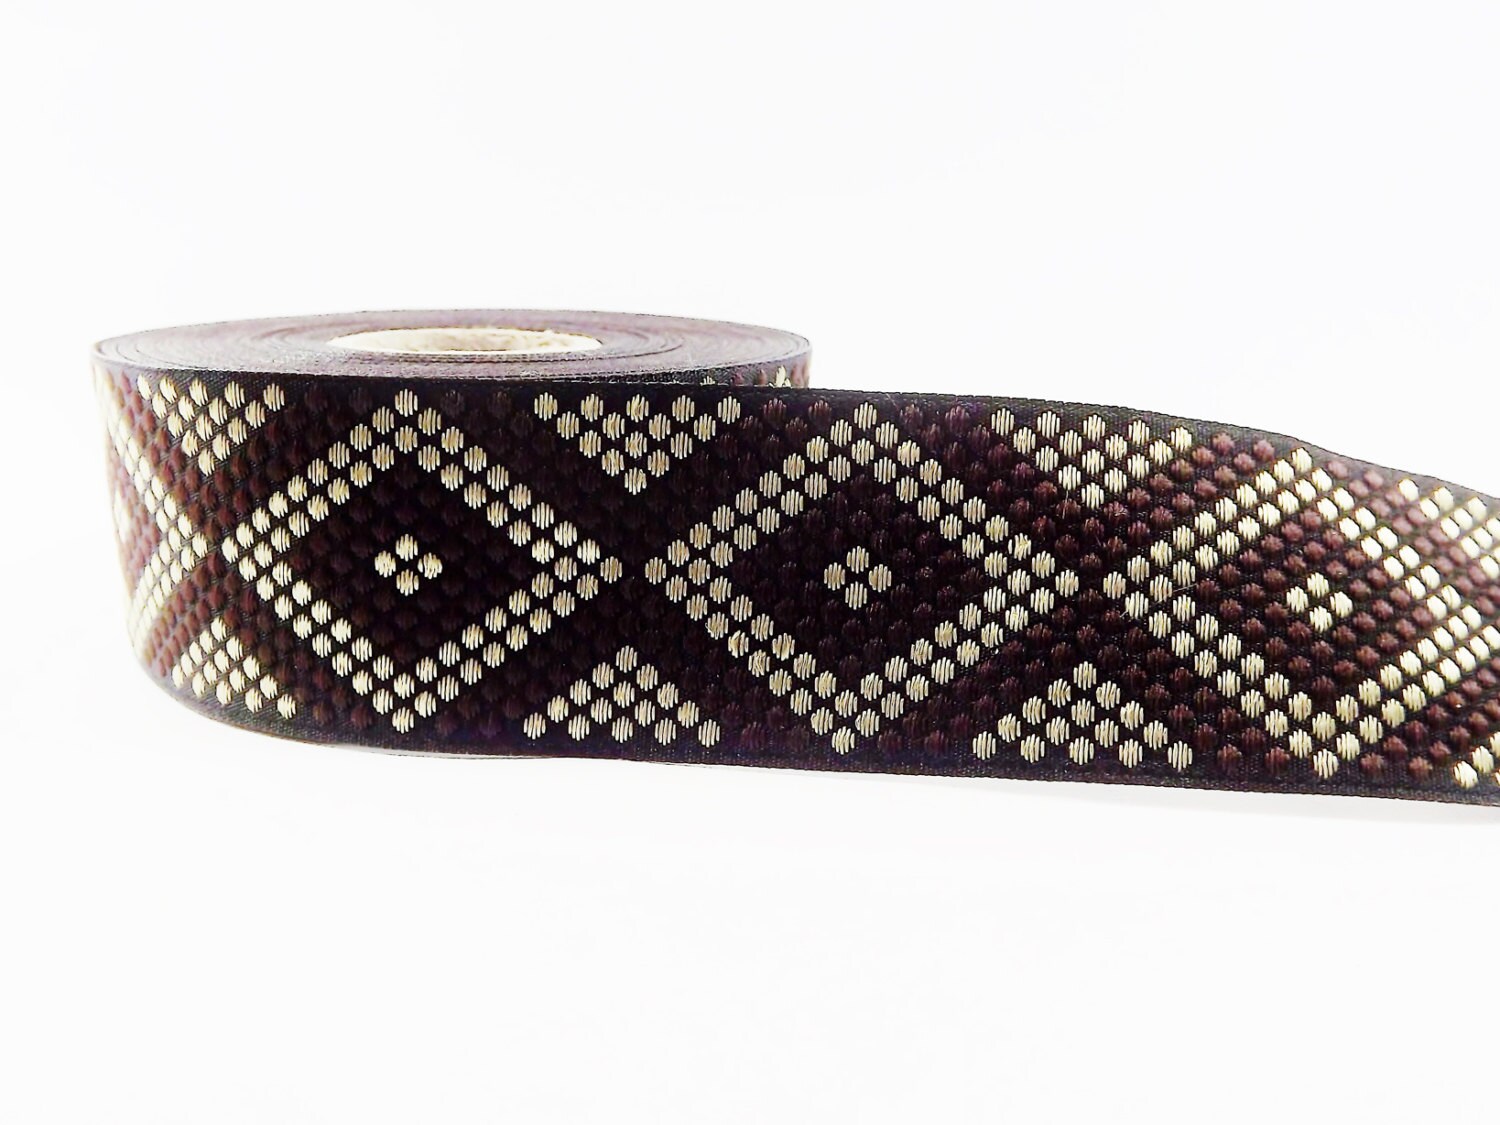 Geometric Dotted Diamond Woven Embroidered Jacquard Trim Ribbon - Brown Black Light Gold - 34mm - 1 Meter  or 3.3 Feet or 1.09 Yards